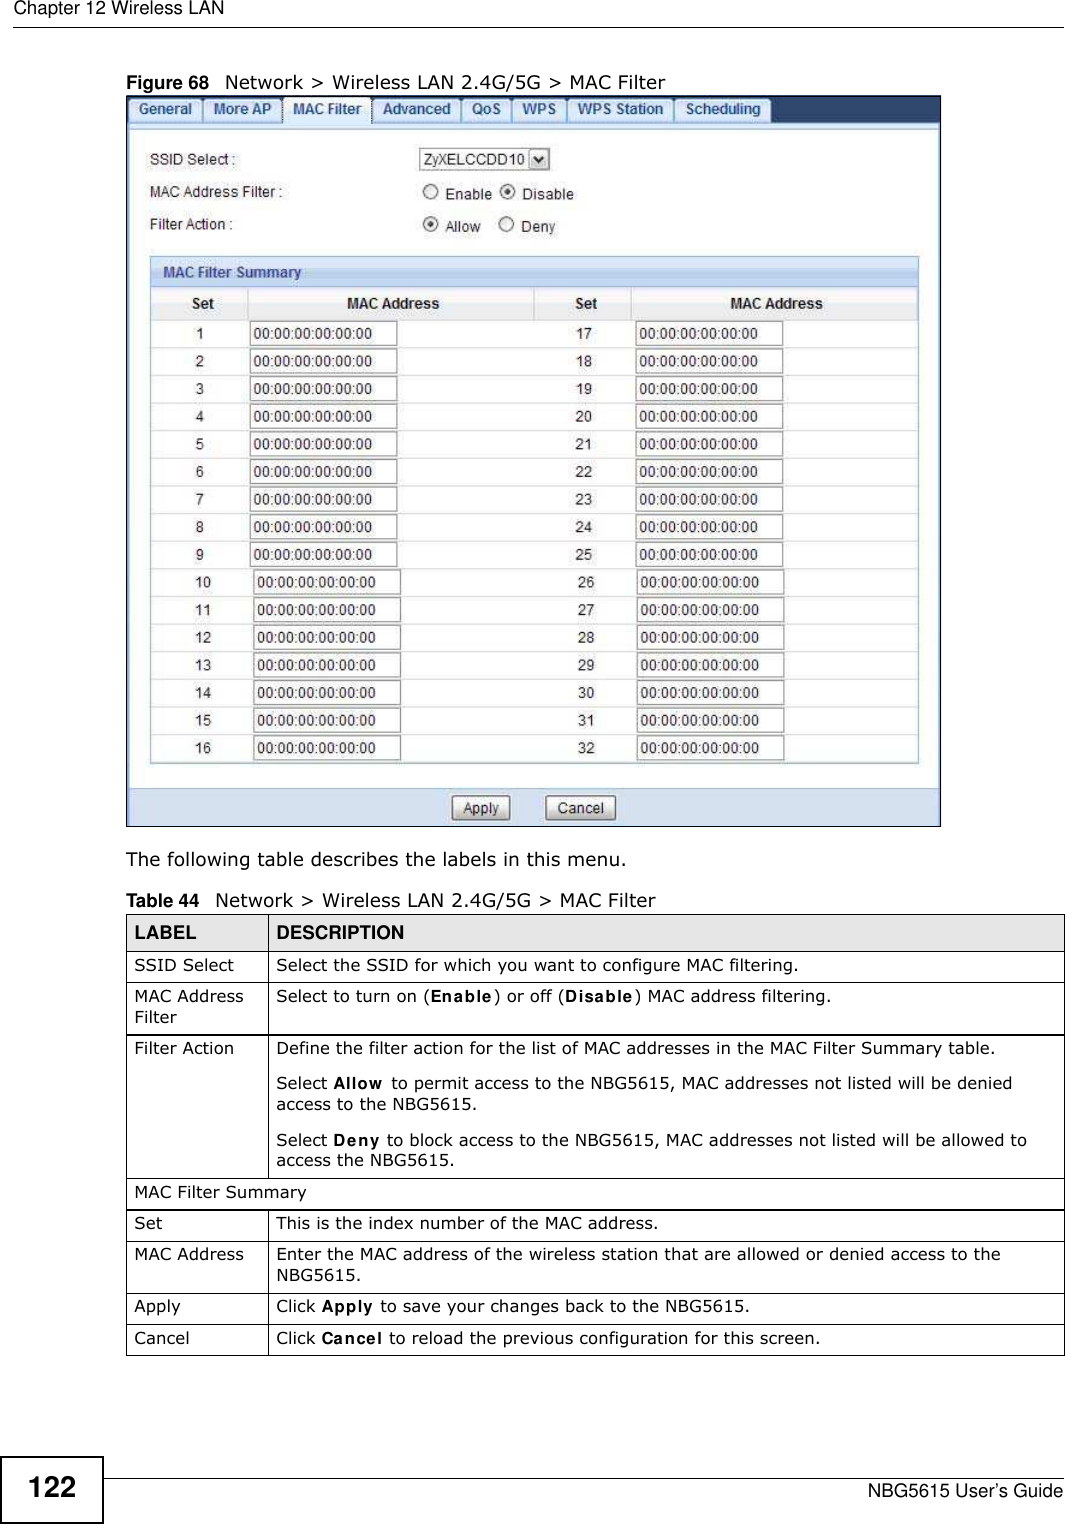 Chapter 12 Wireless LANNBG5615 User’s Guide122Figure 68   Network &gt; Wireless LAN 2.4G/5G &gt; MAC FilterThe following table describes the labels in this menu.Table 44   Network &gt; Wireless LAN 2.4G/5G &gt; MAC FilterLABEL DESCRIPTIONSSID Select Select the SSID for which you want to configure MAC filtering.MAC Address FilterSelect to turn on (Enable) or off (Disable) MAC address filtering.Filter Action Define the filter action for the list of MAC addresses in the MAC Filter Summary table.Select Allow  to permit access to the NBG5615, MAC addresses not listed will be denied access to the NBG5615. Select Deny to block access to the NBG5615, MAC addresses not listed will be allowed to access the NBG5615. MAC Filter SummarySet This is the index number of the MAC address.MAC Address Enter the MAC address of the wireless station that are allowed or denied access to the NBG5615.Apply Click Apply to save your changes back to the NBG5615.Cancel Click Cancel to reload the previous configuration for this screen.